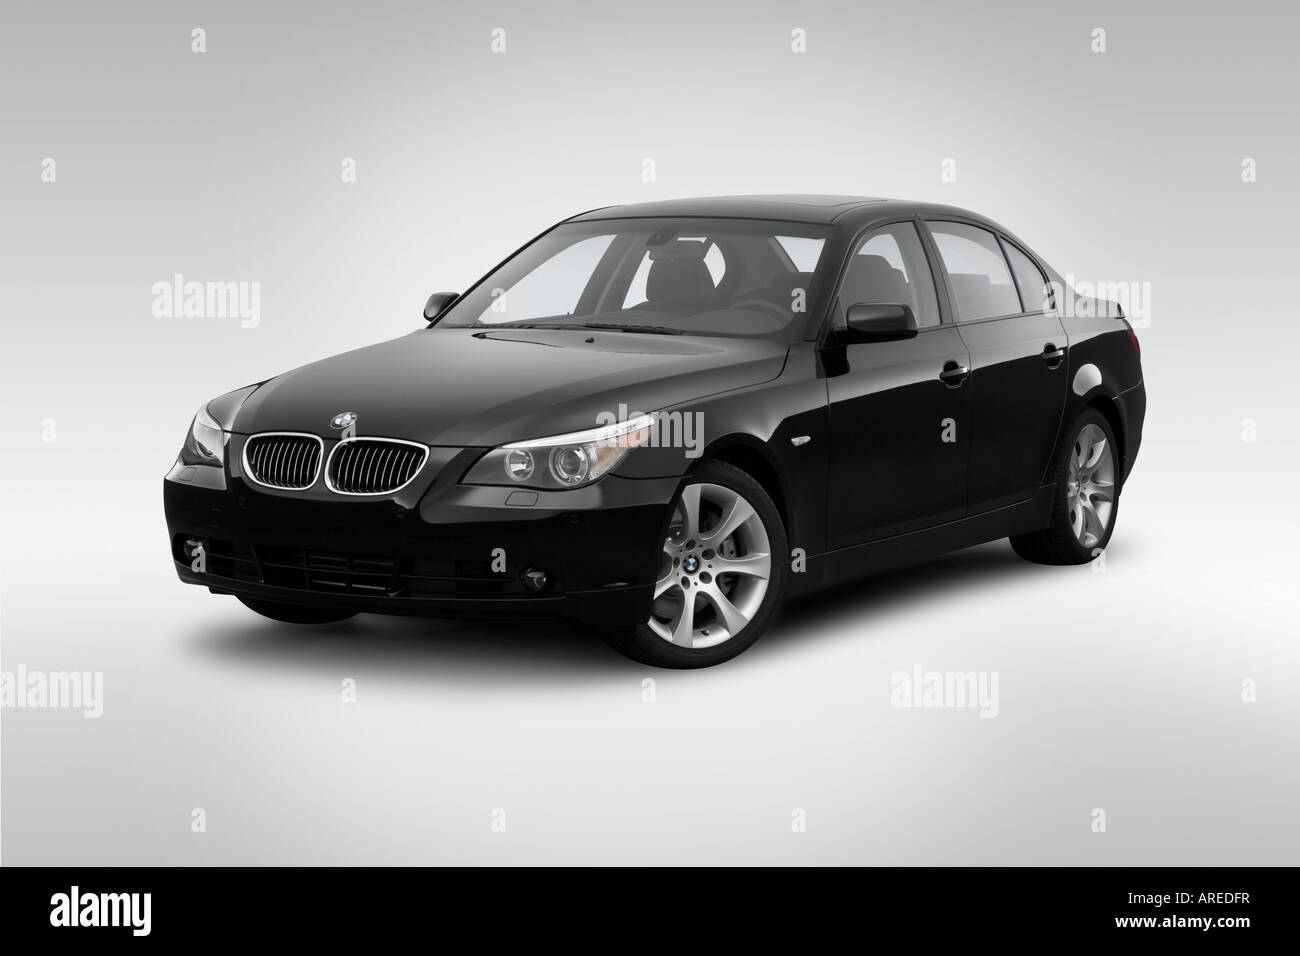 2006 BMW 5-series 550i in Black - Front angle view Stock Photo